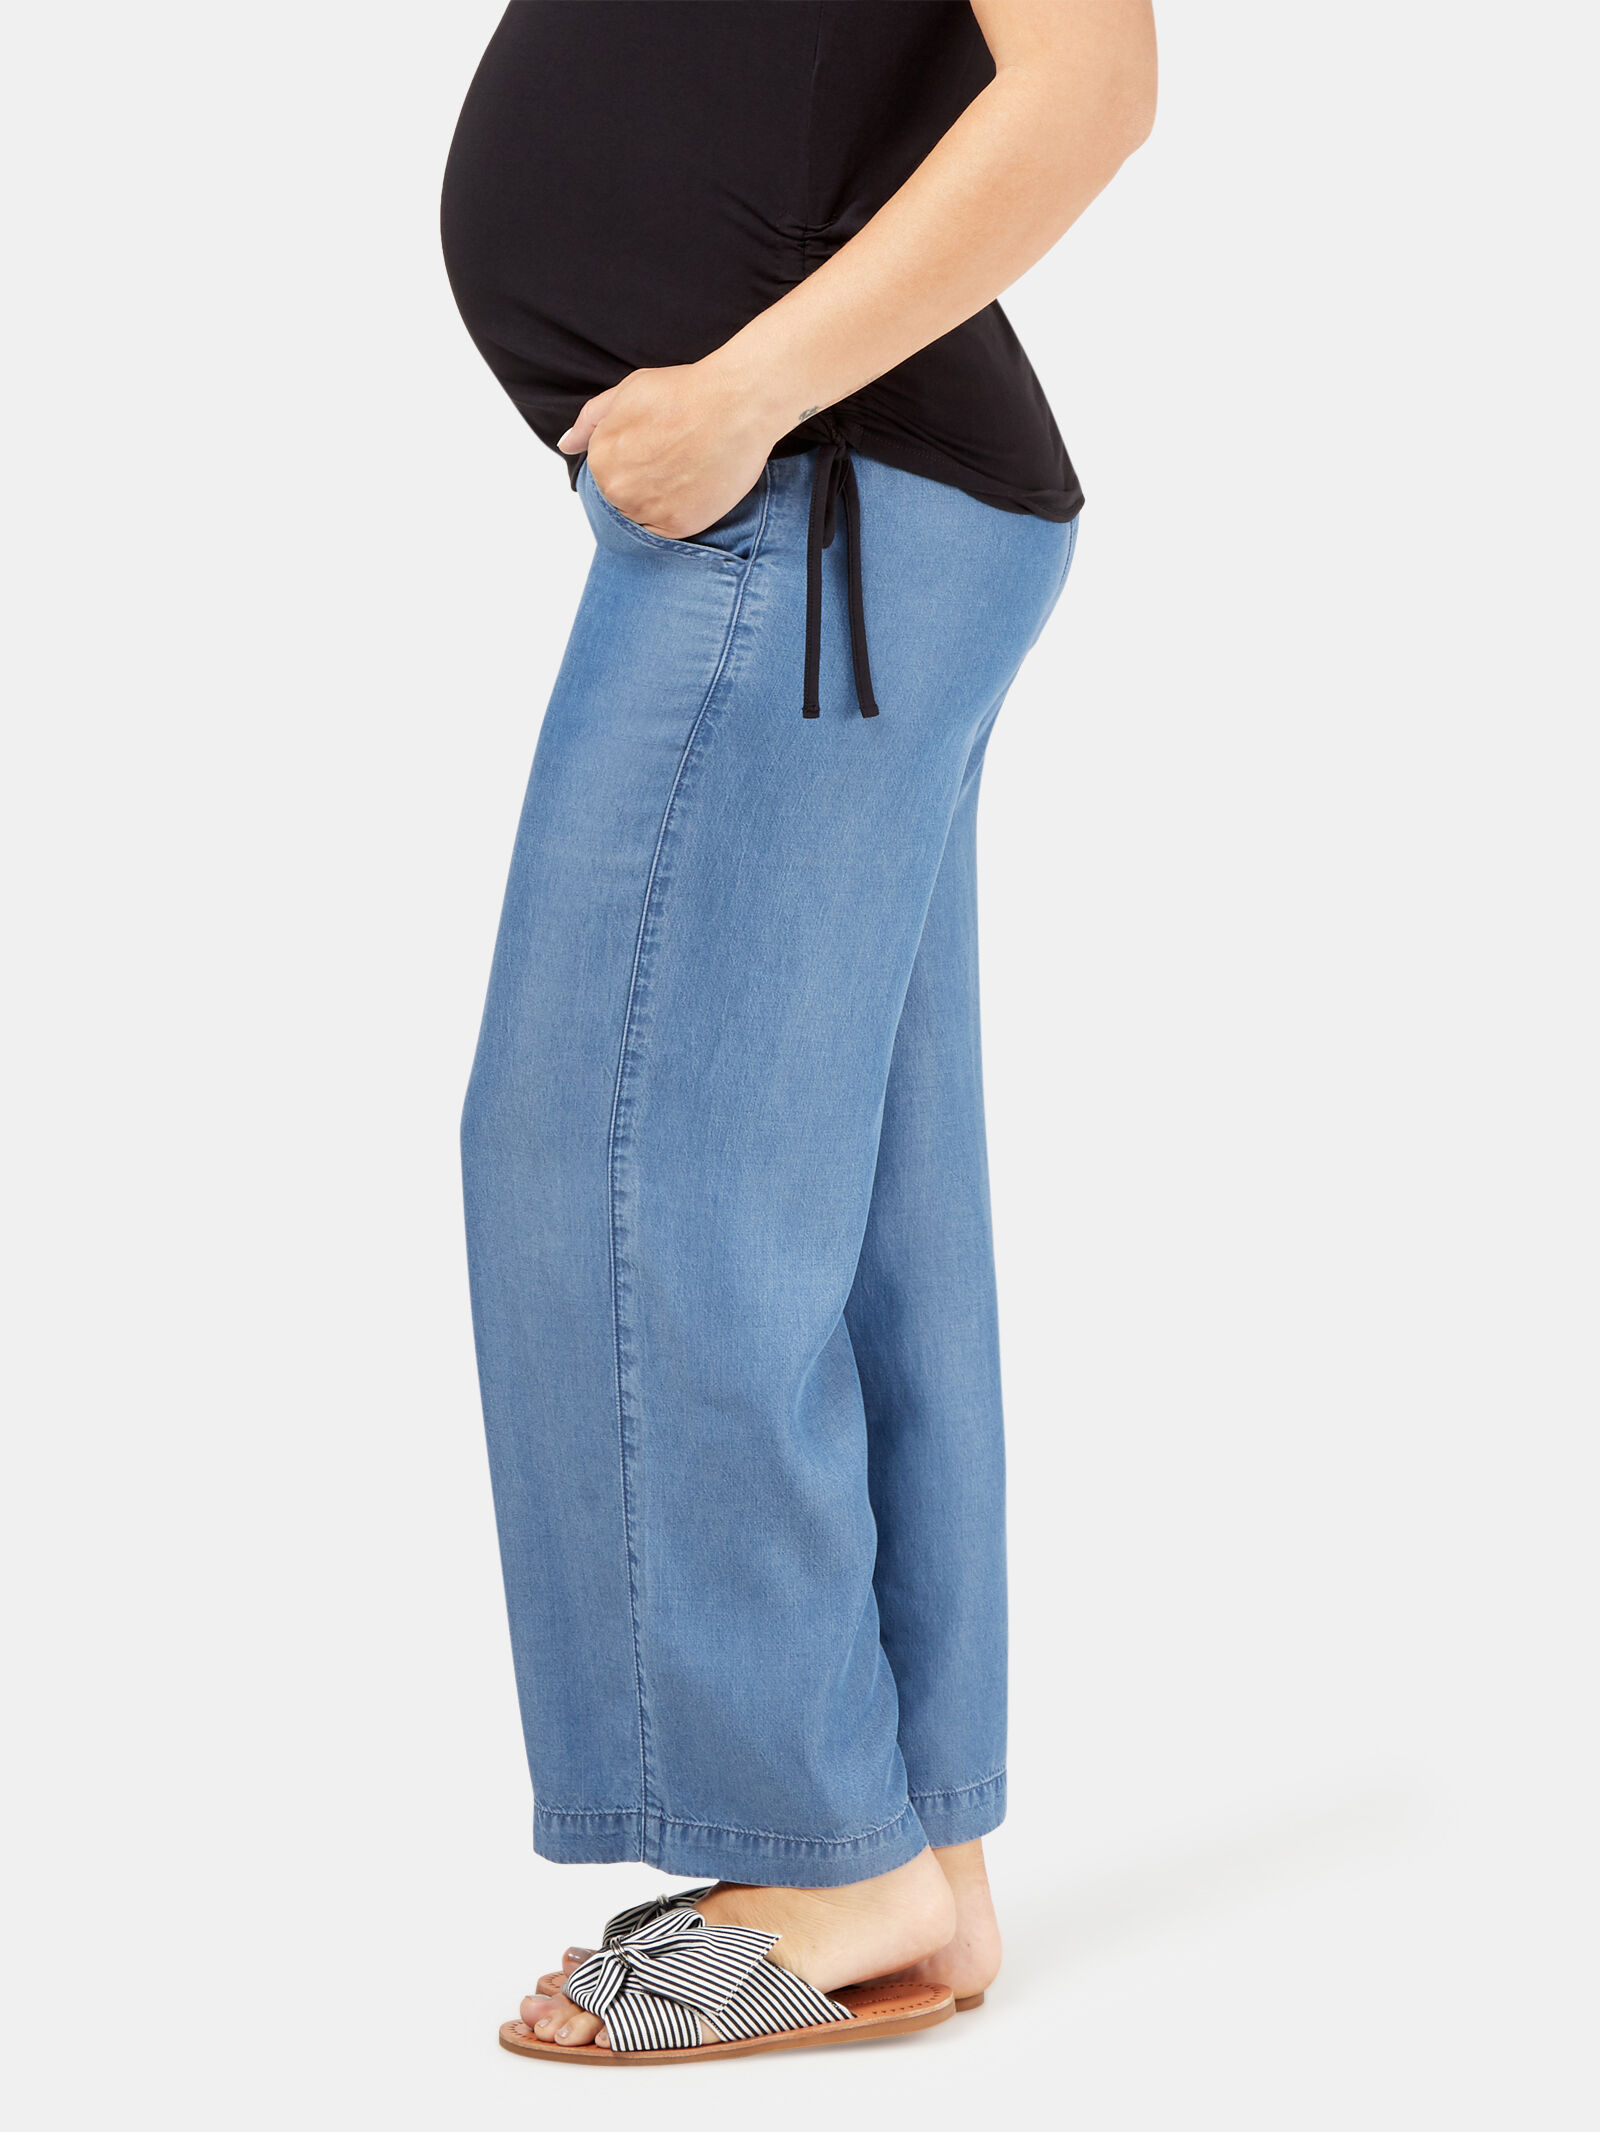 Buy Grey Jeans & Pants for Women by THE MOM STORE Online | Ajio.com